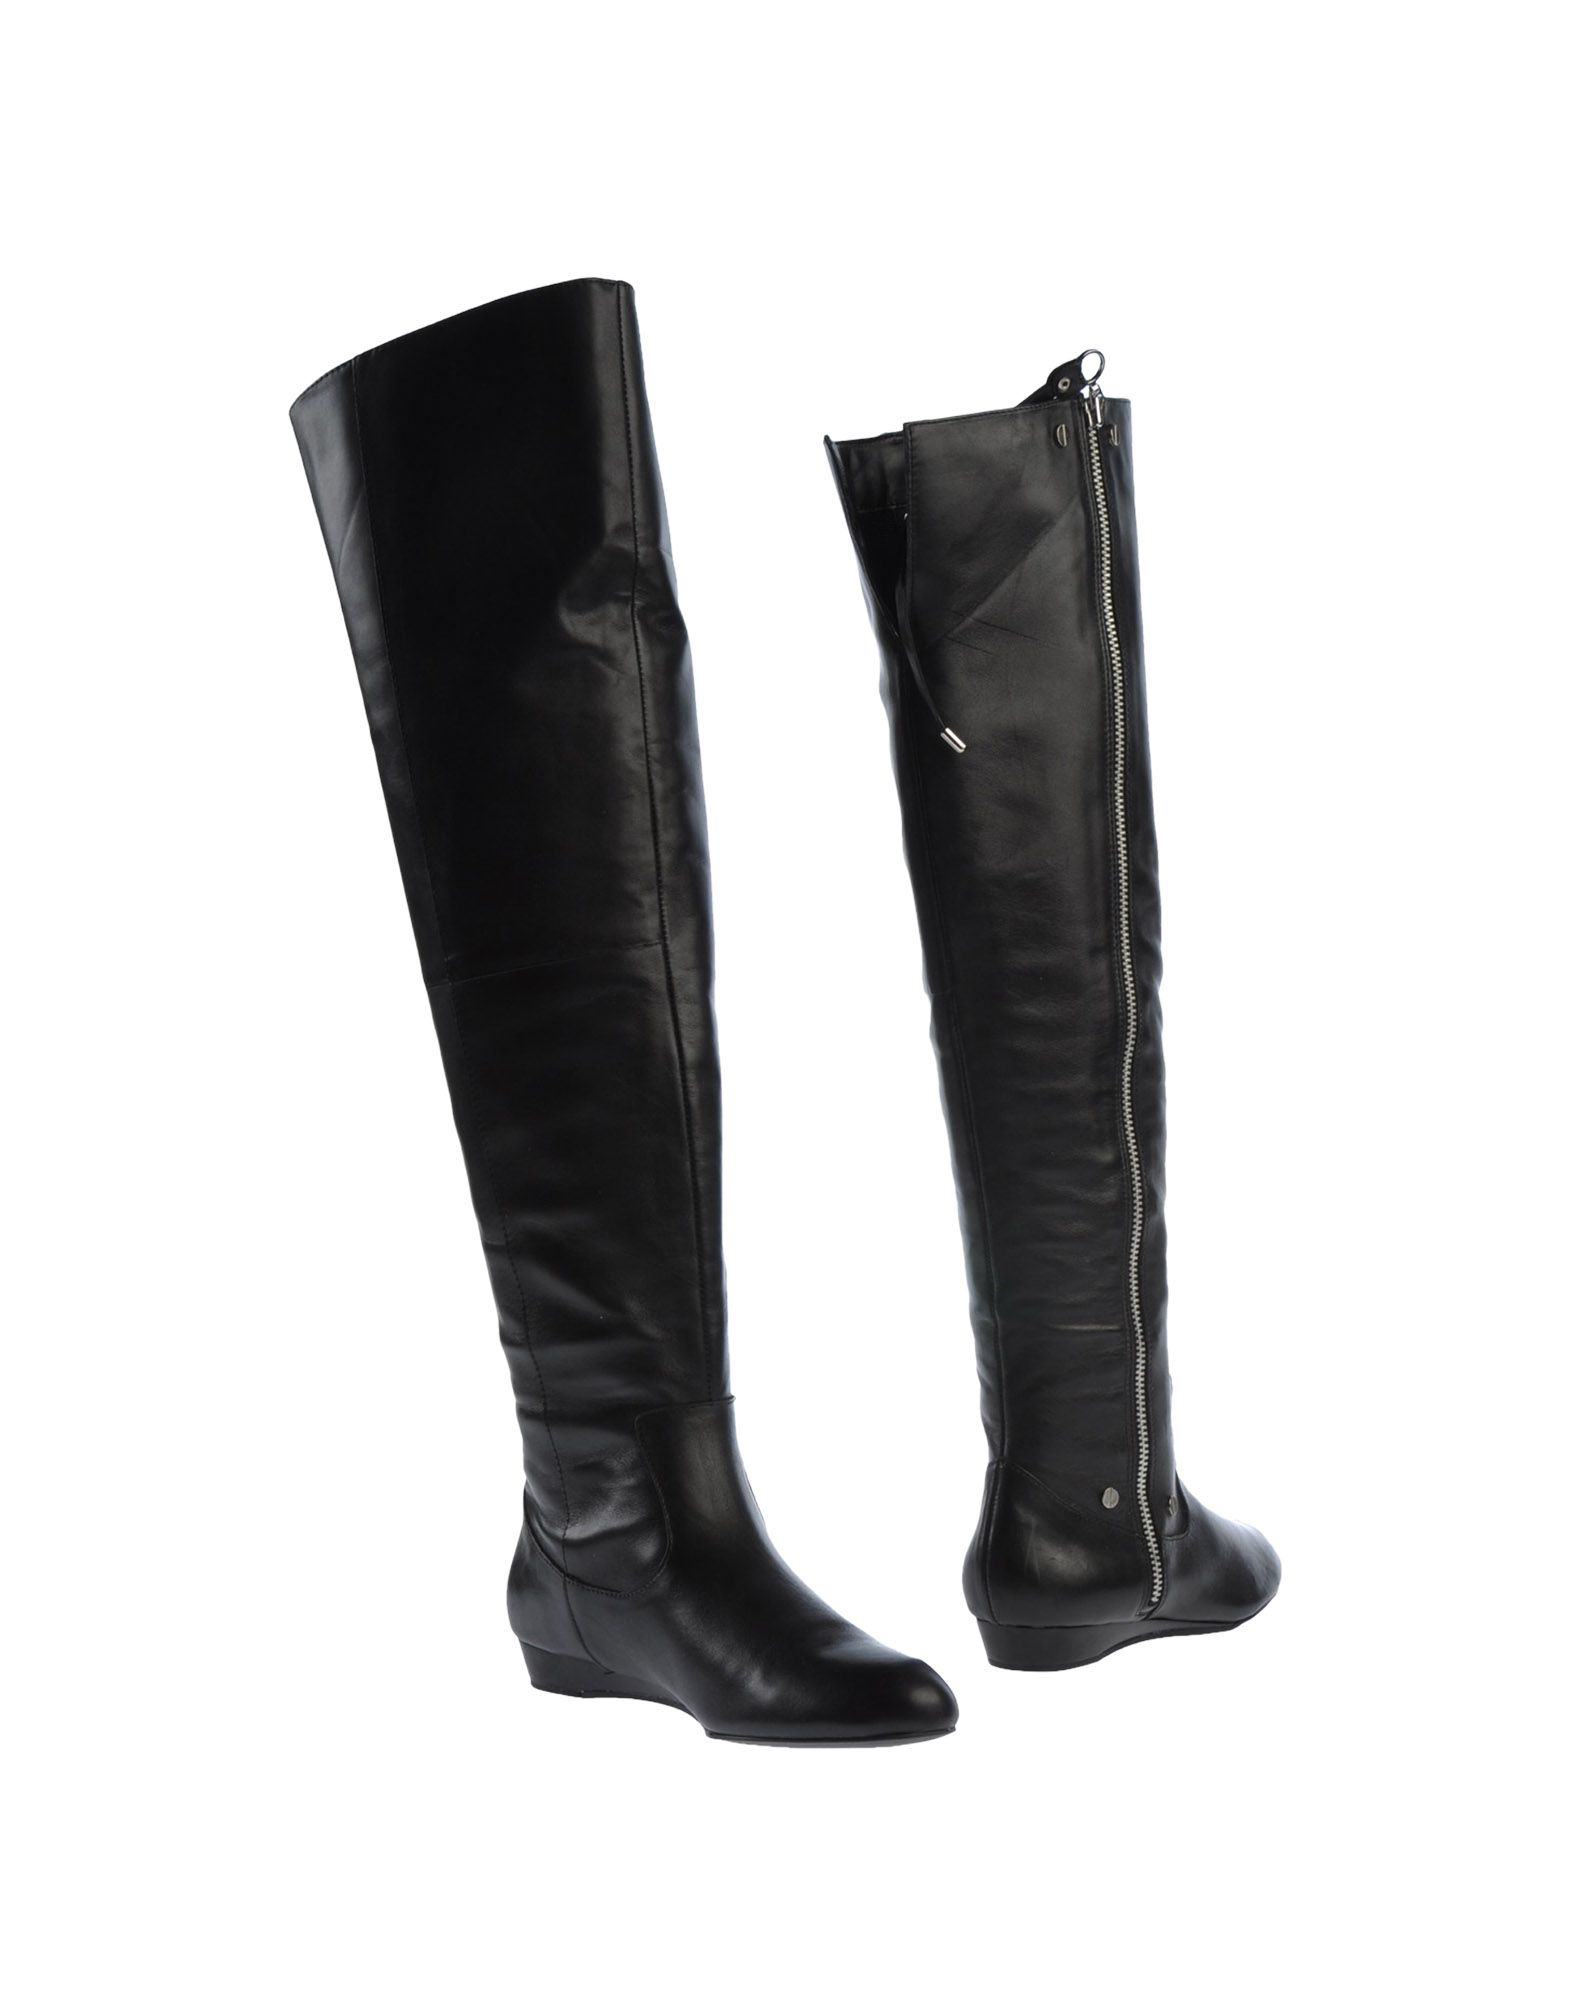 Jessica simpson Boots in Black - Save 15% | Lyst